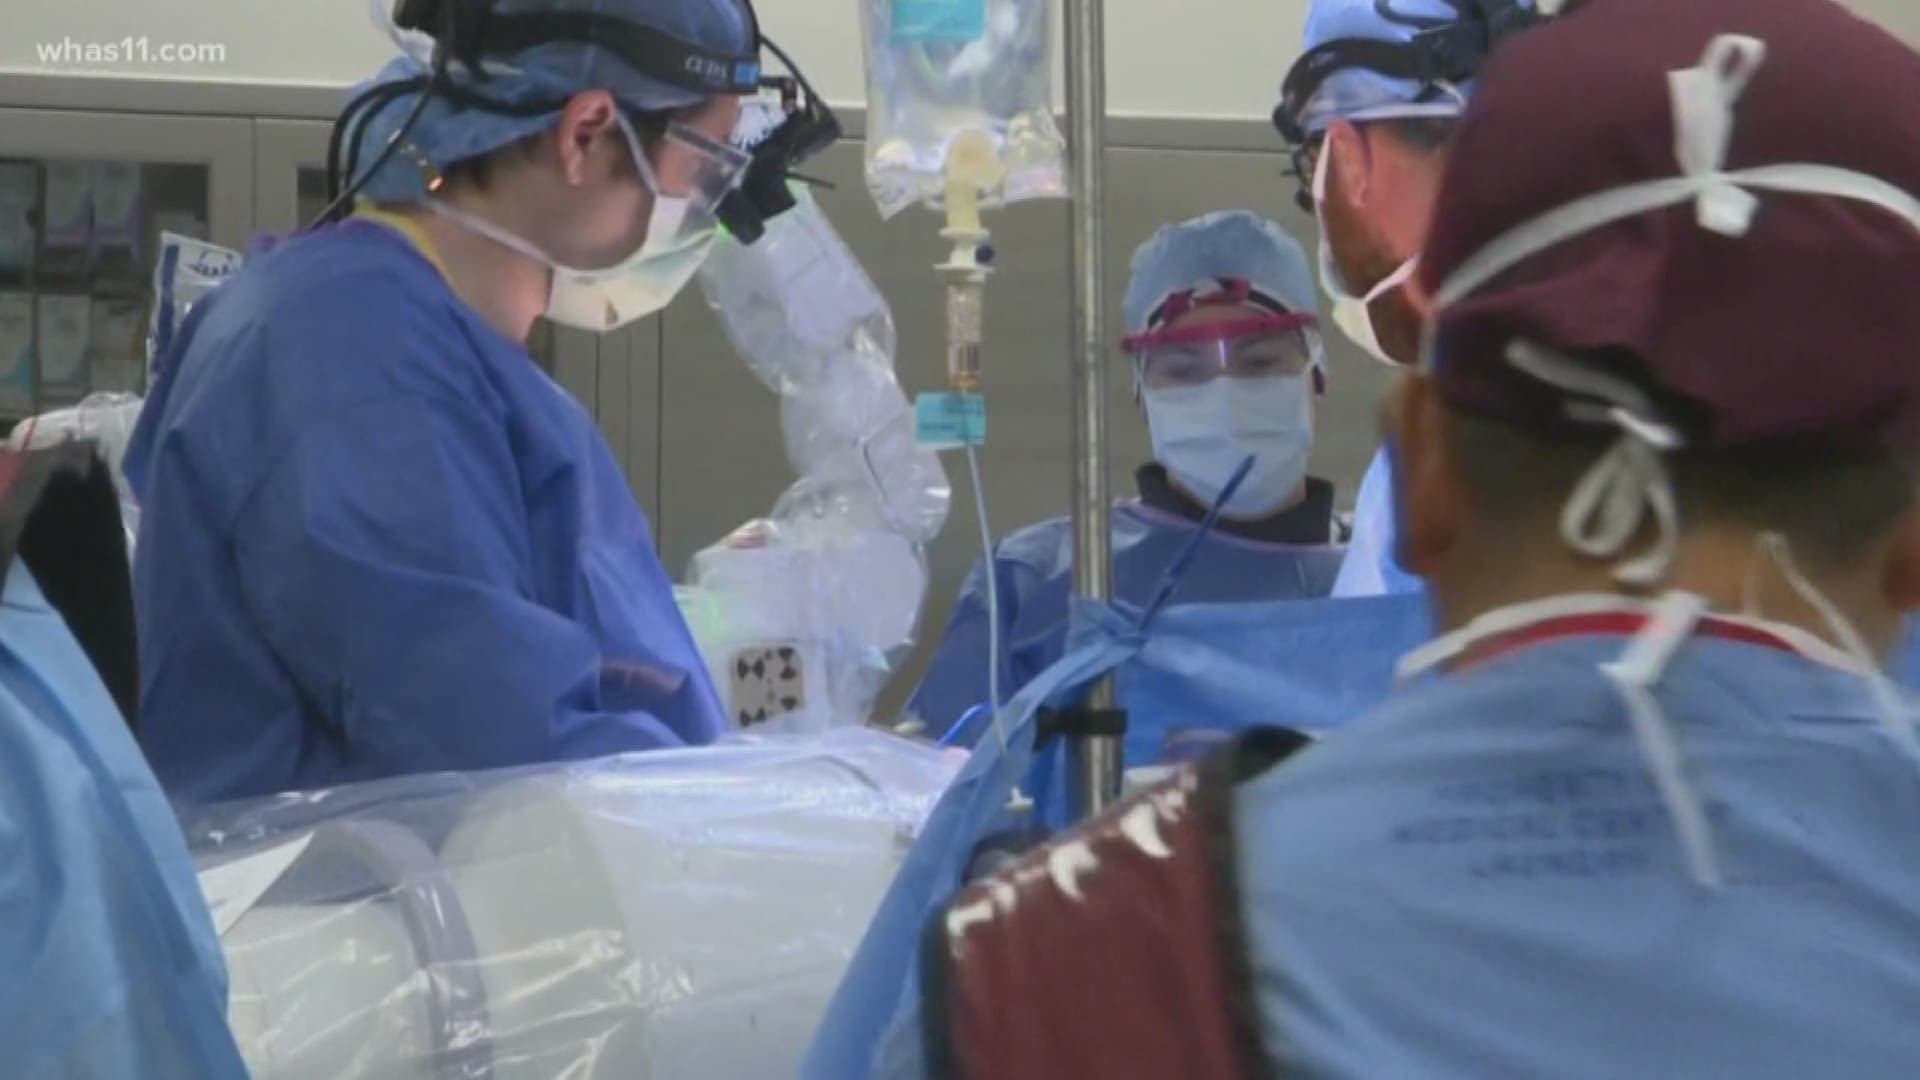 Robot surgery " Game Changer" in Louisville